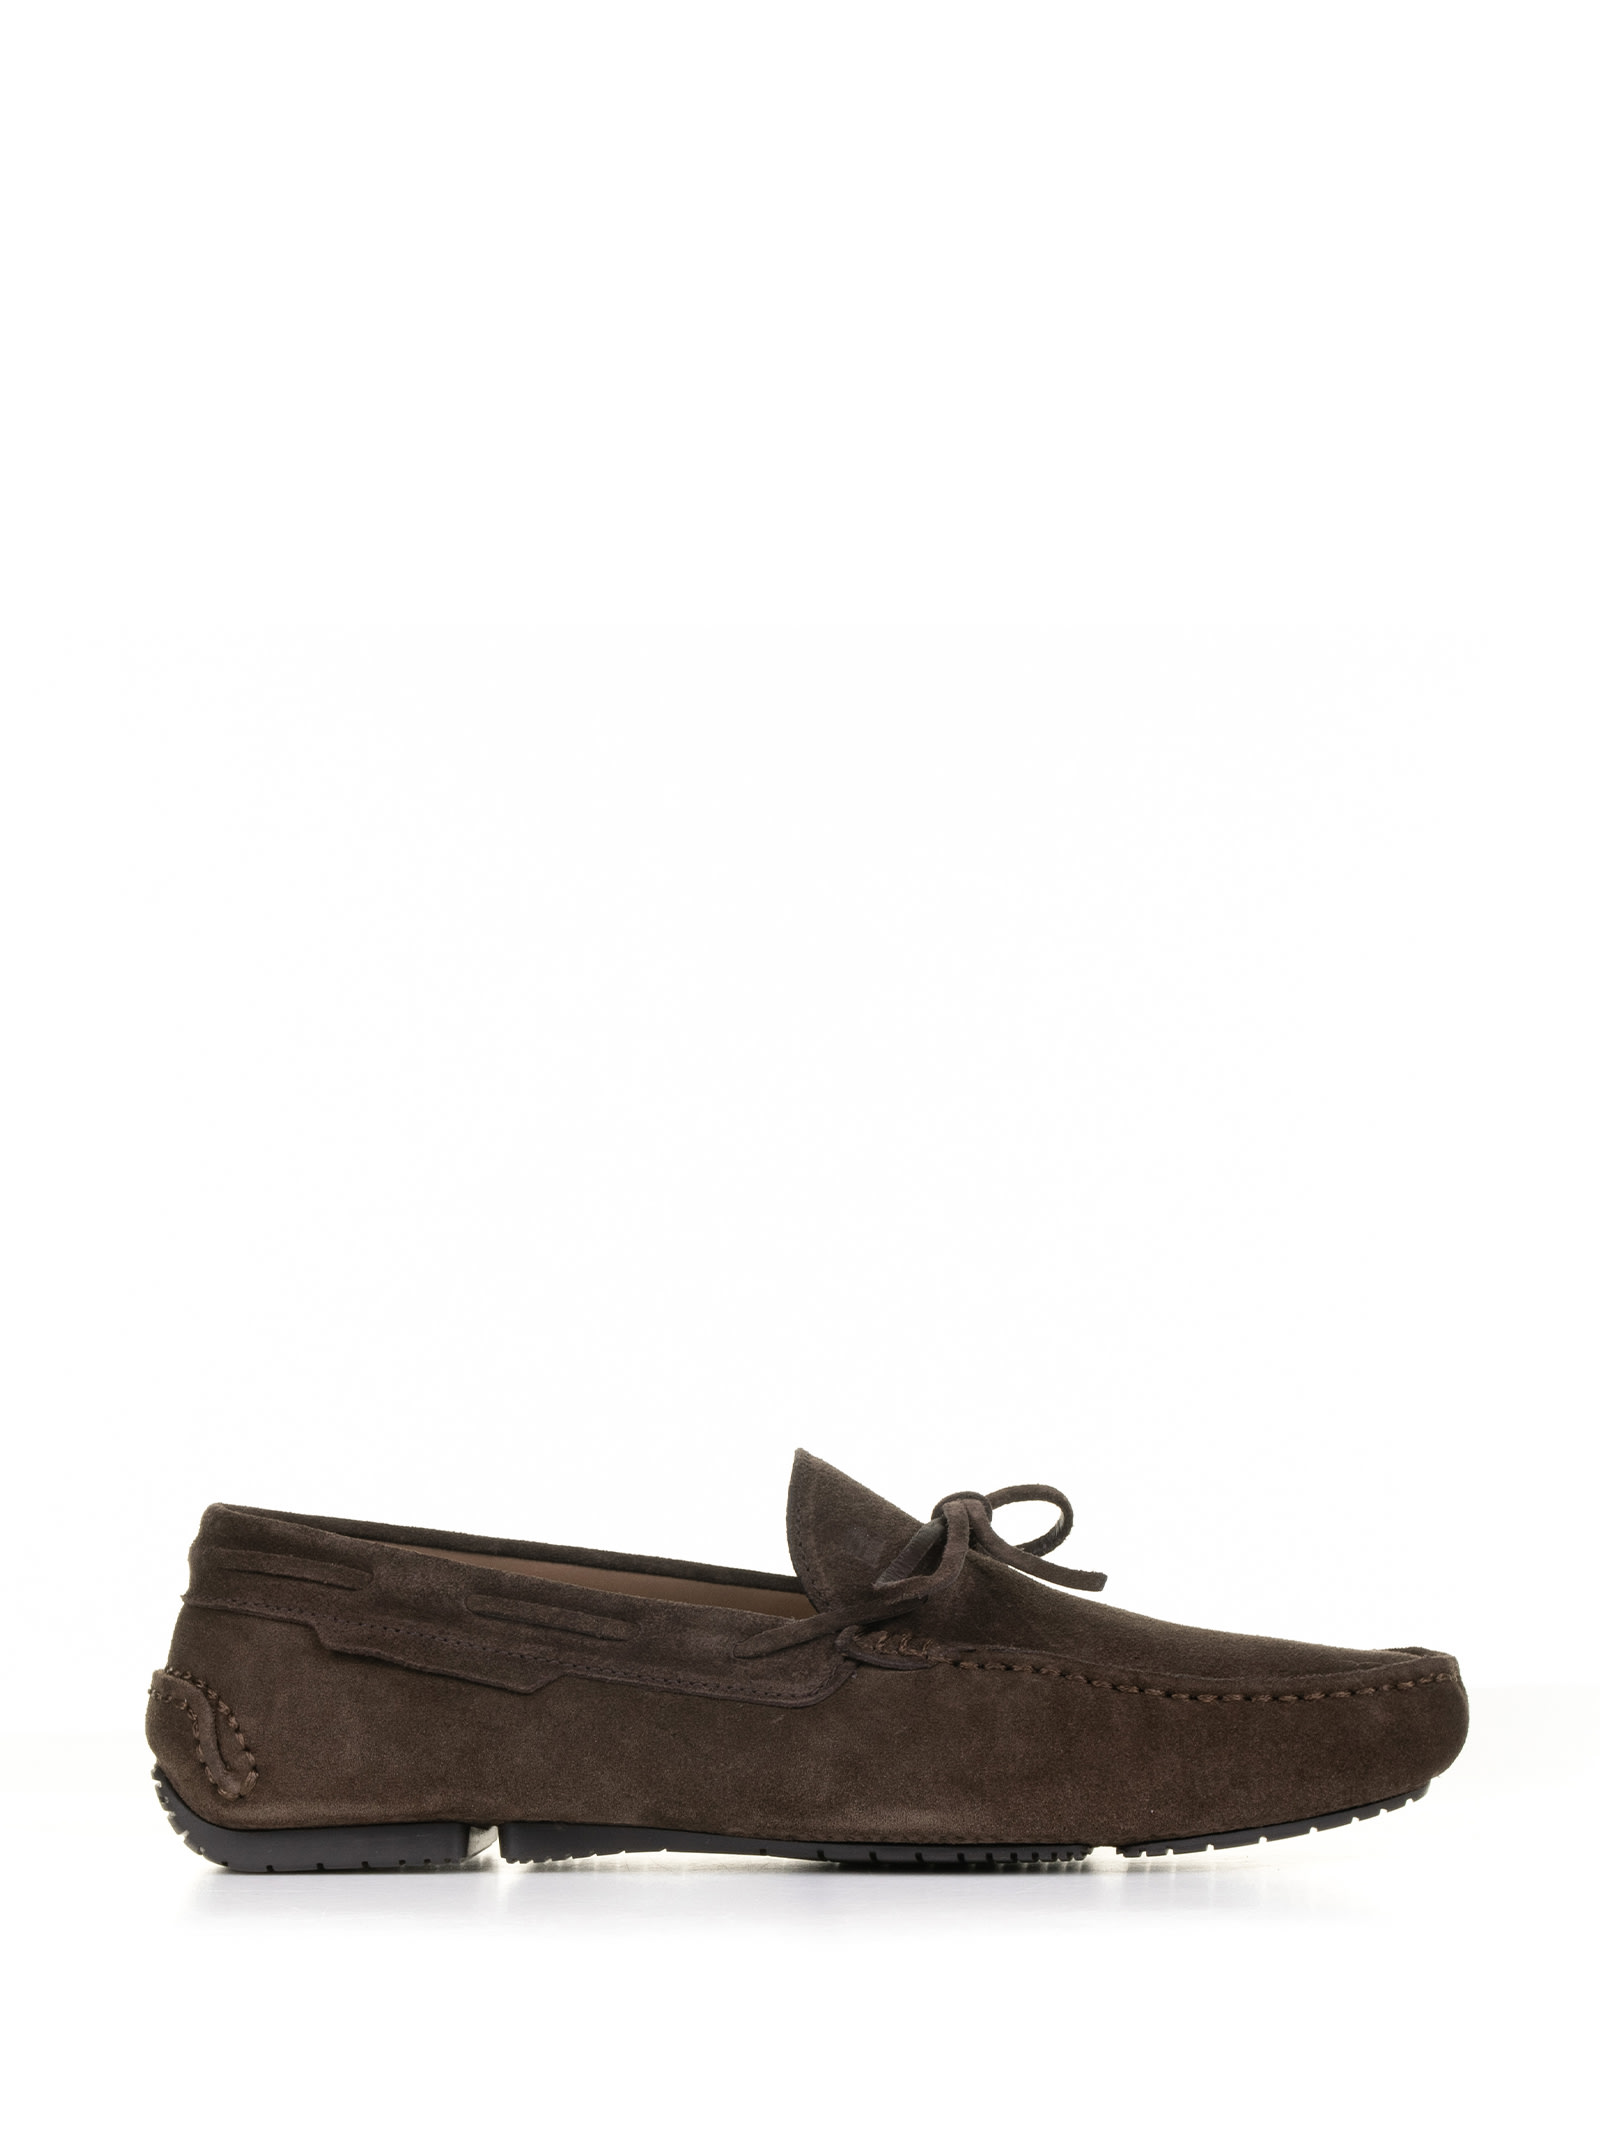 Shop Fratelli Rossetti One Brown Suede Moccasin In T.moro